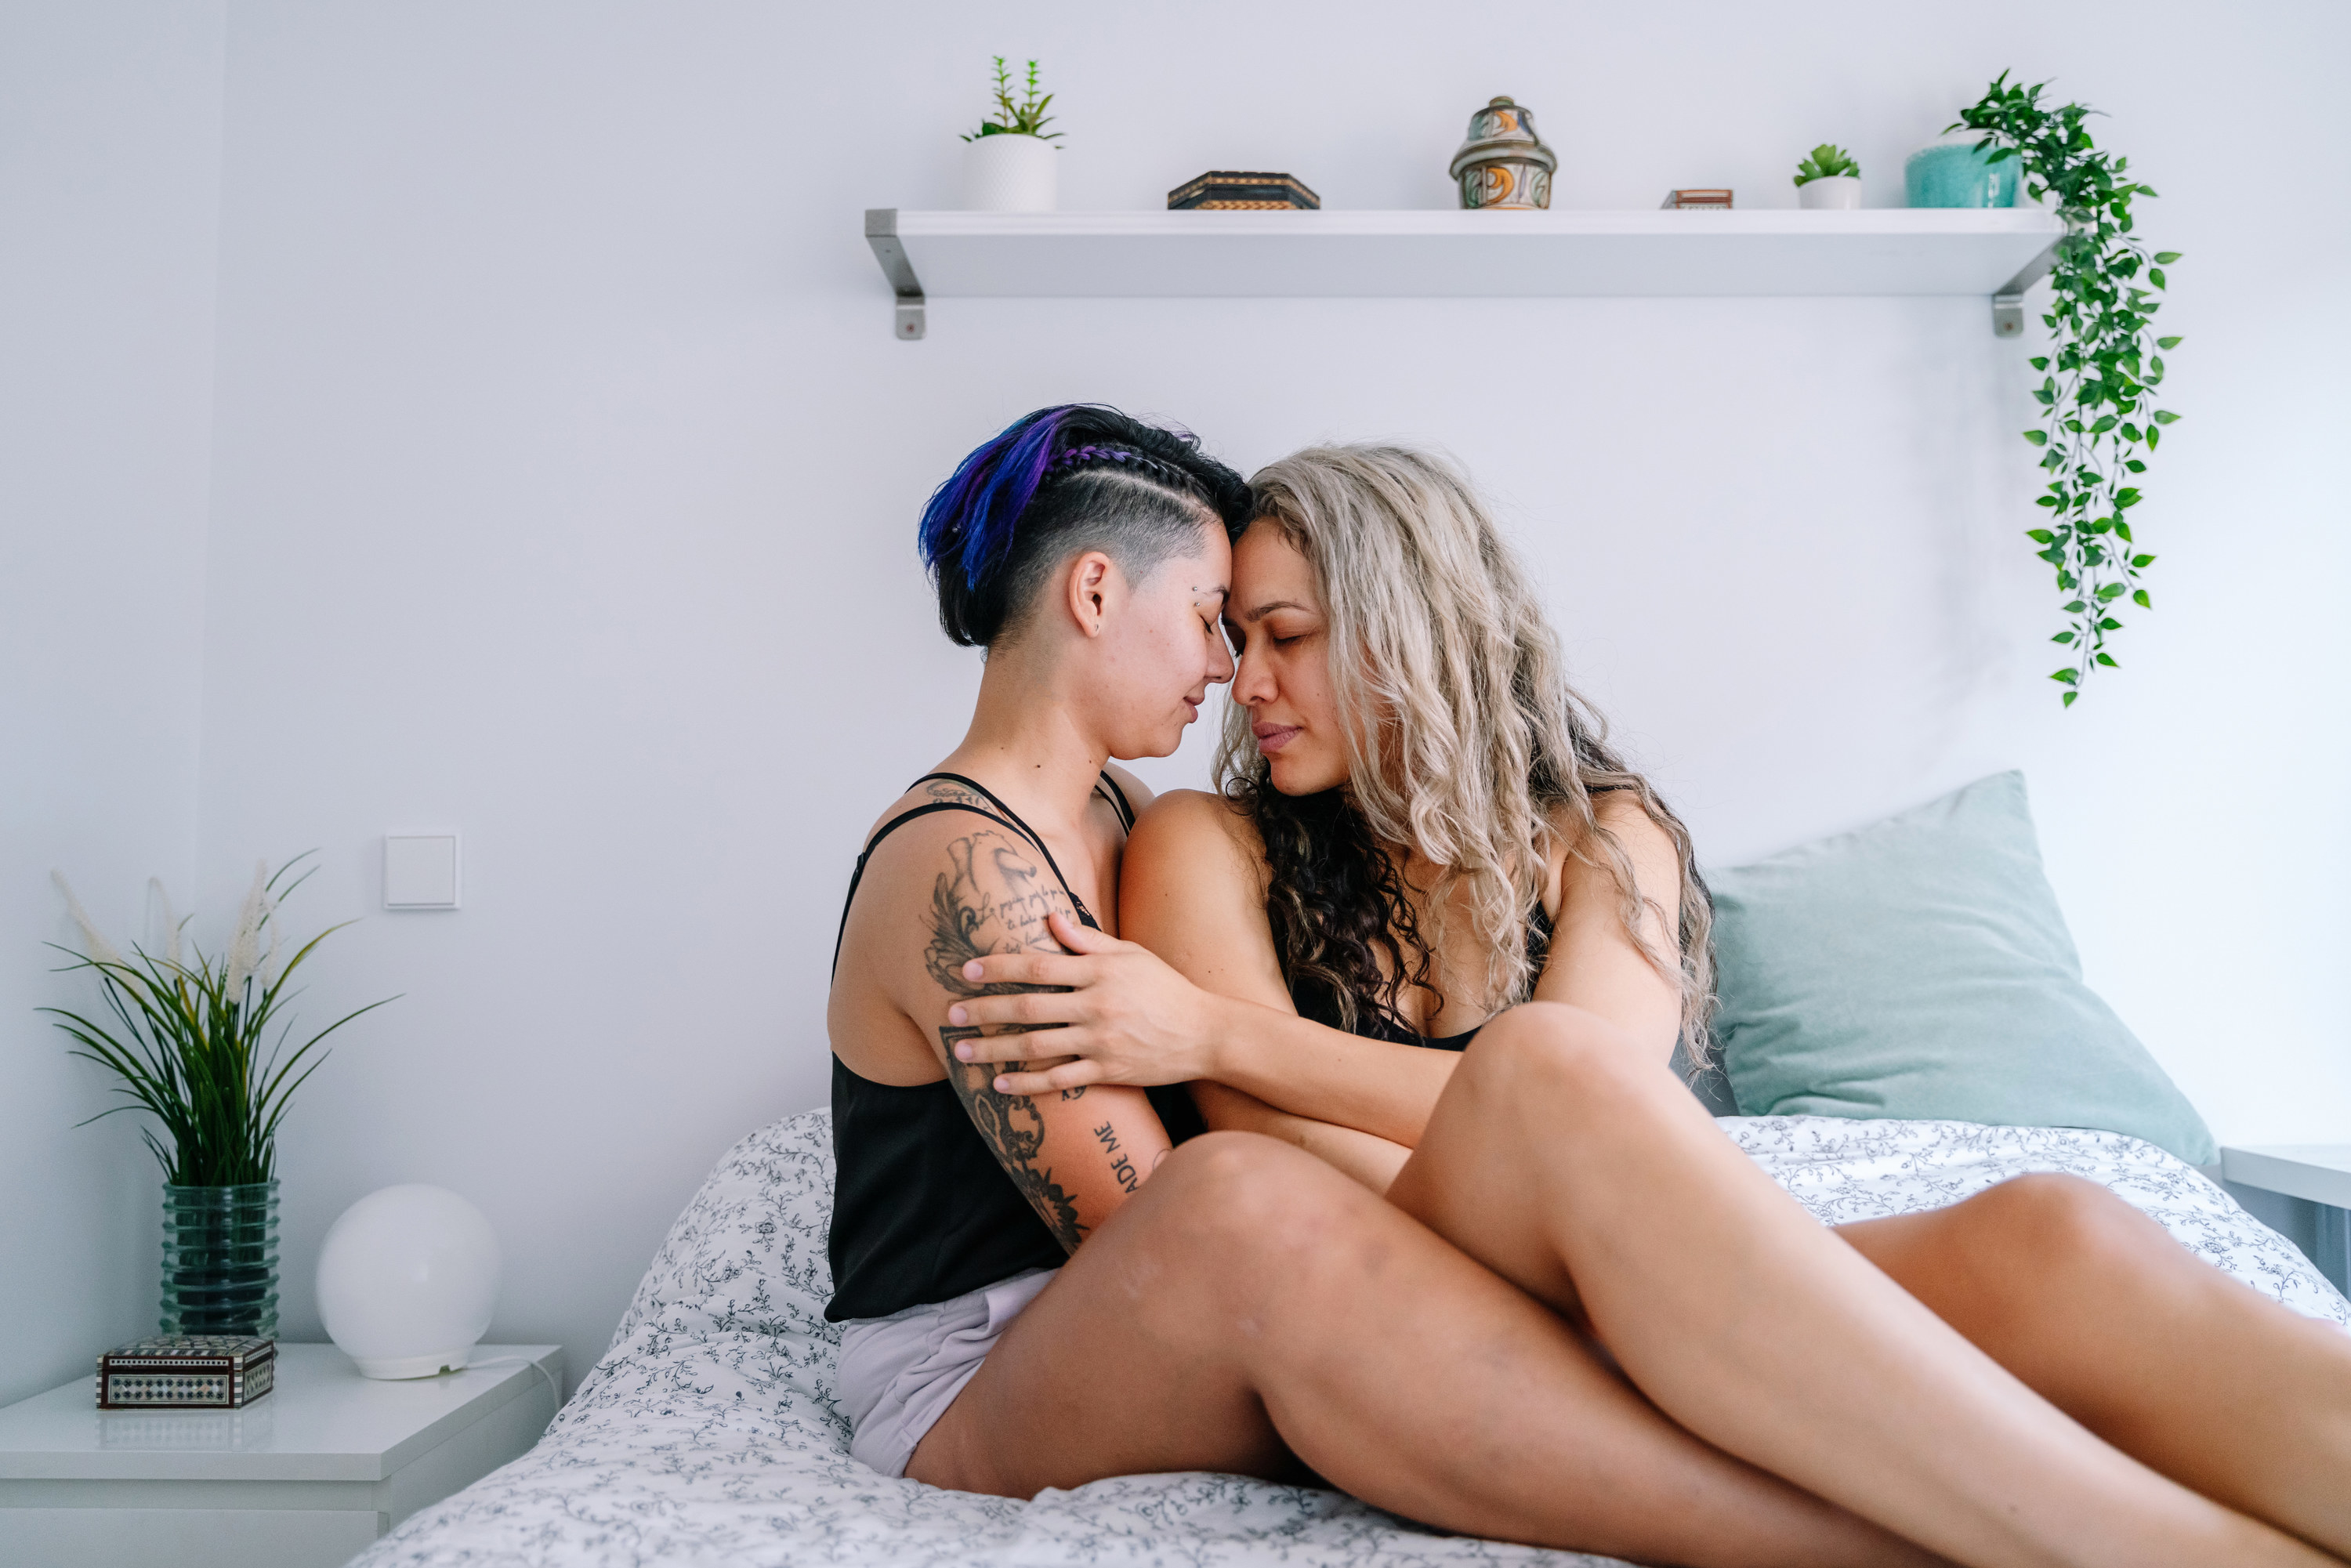 A couple sitting in bed embracing